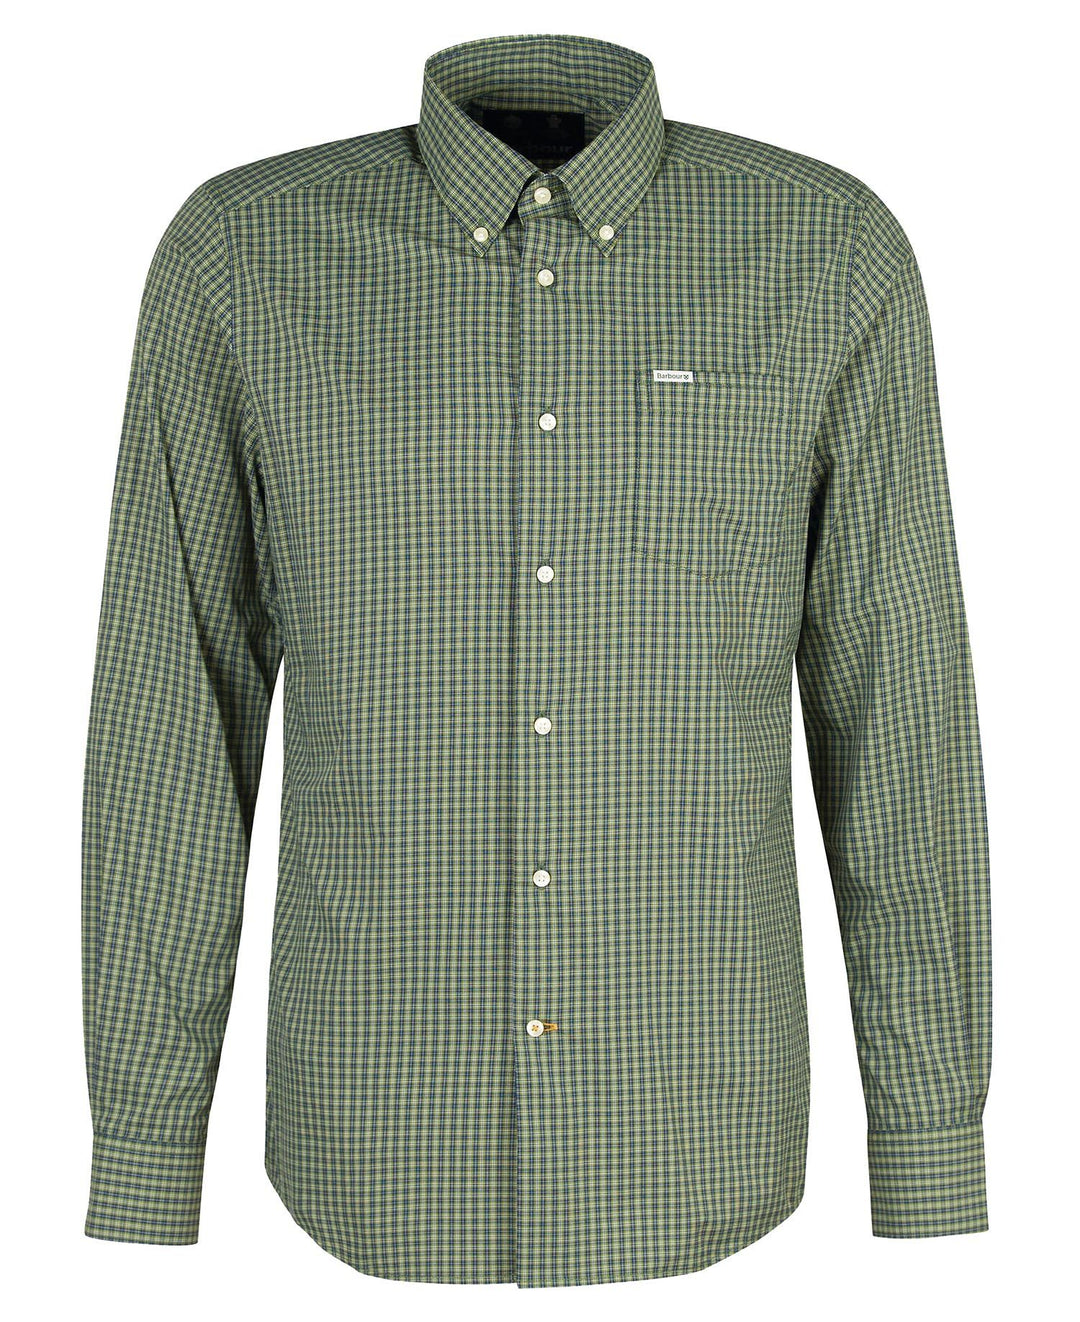 BARBOUR GROVE PERFORMANCE SHIRT - OLIVE